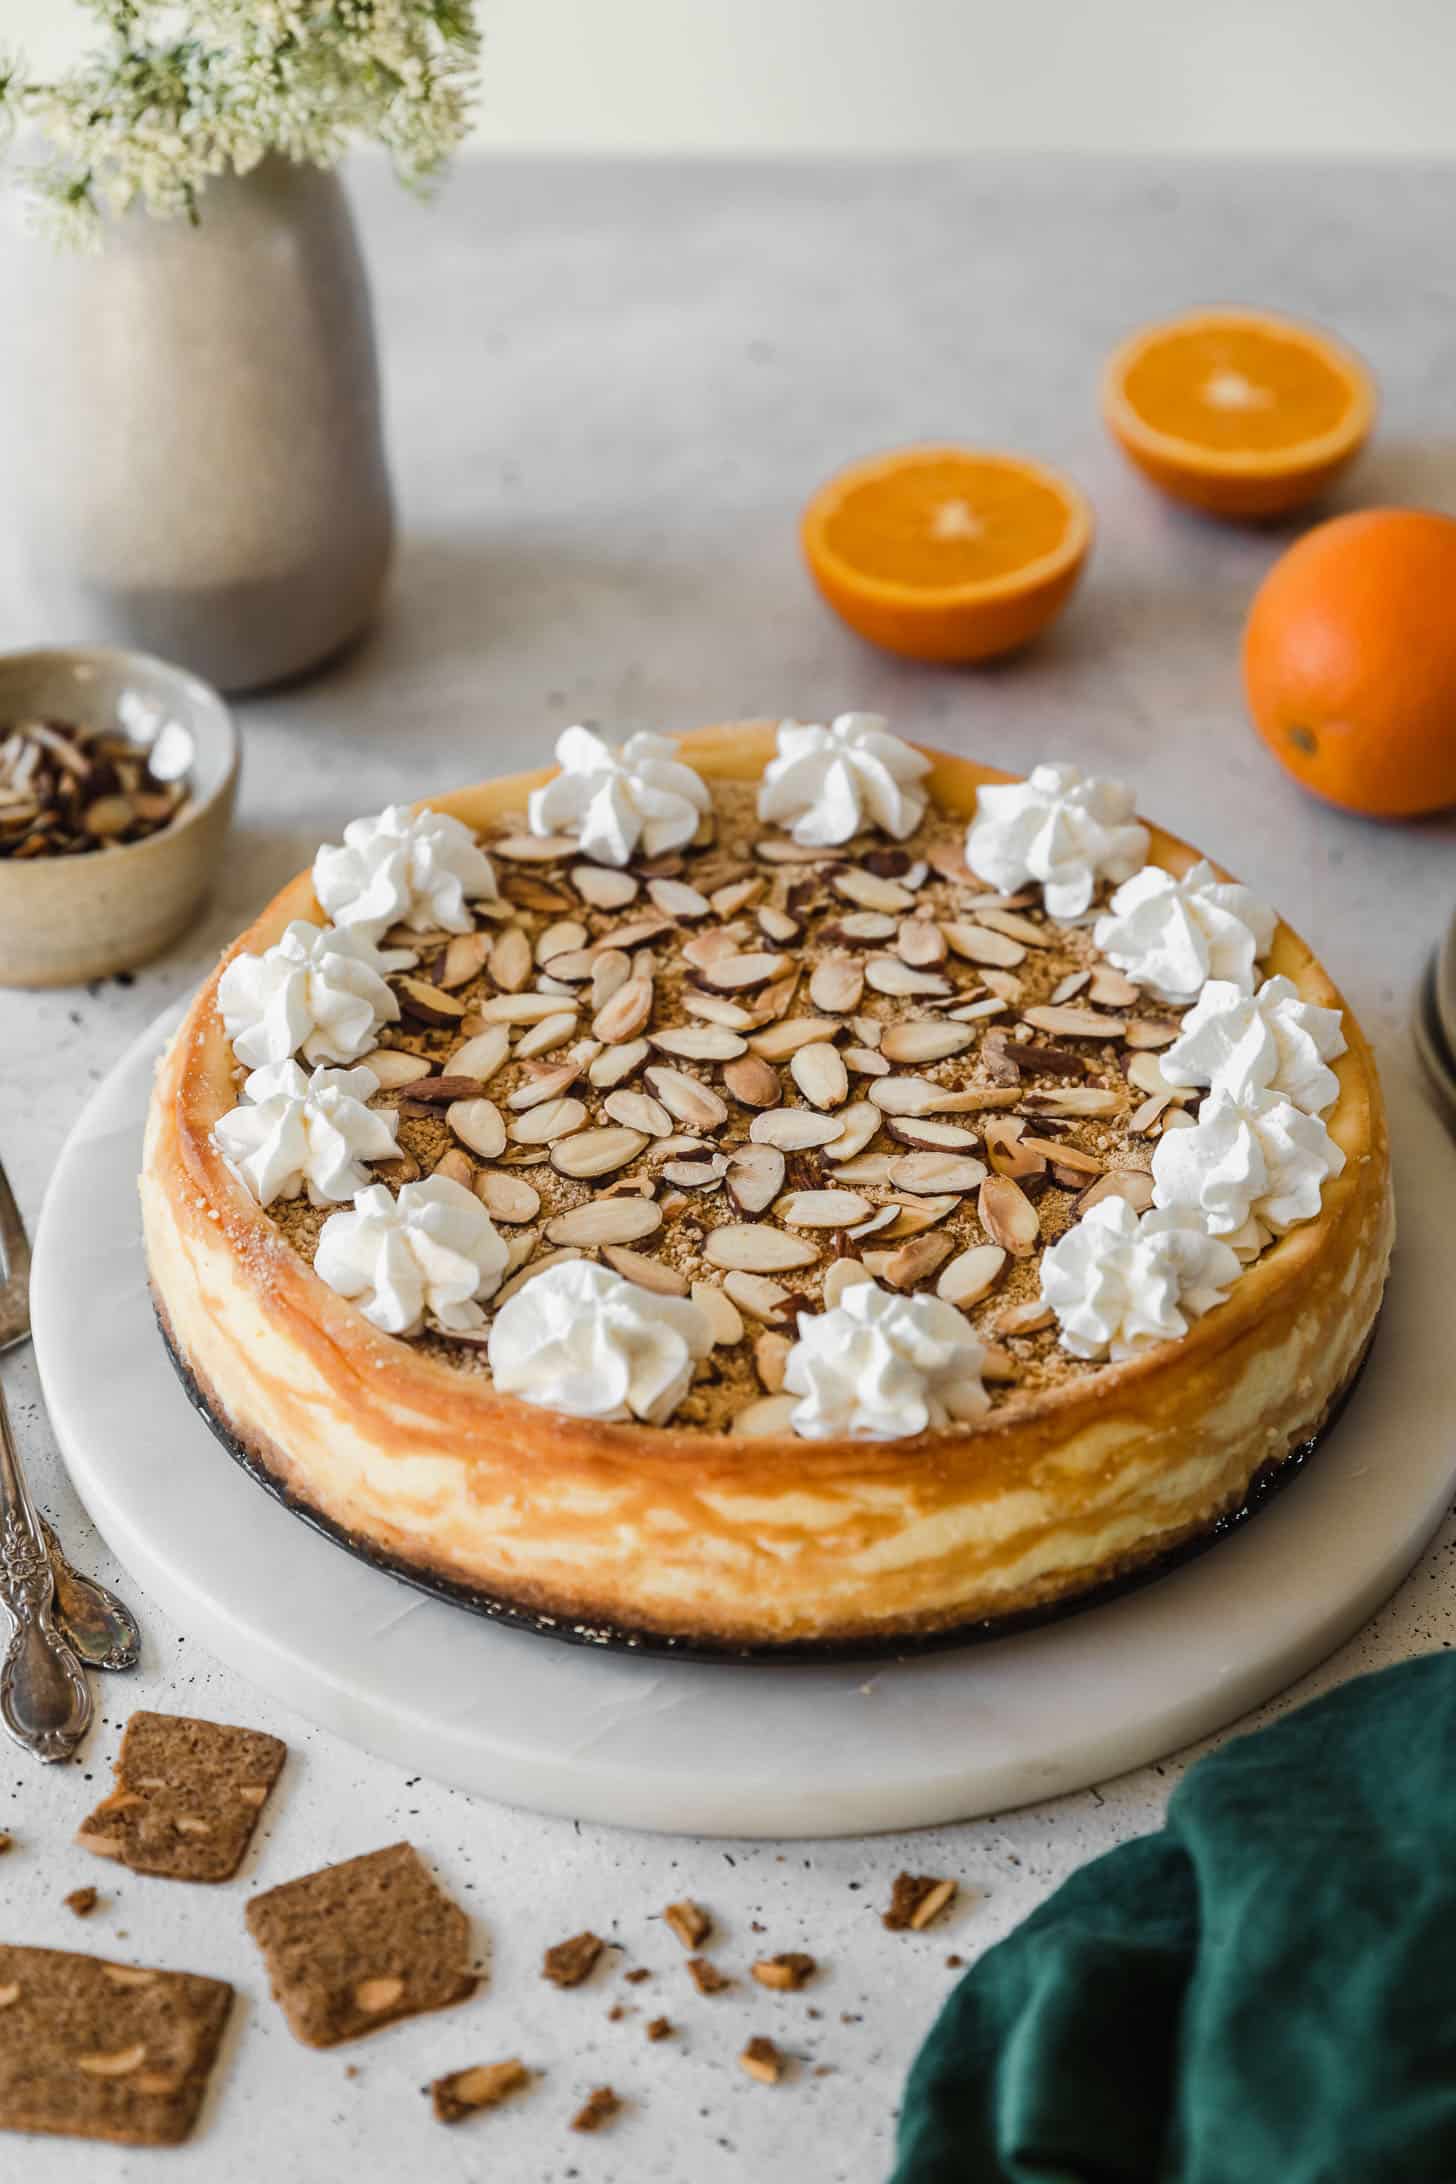 A cheesecake on a white table next to oranges, an emerald green linen, and a flower vase of white buds.